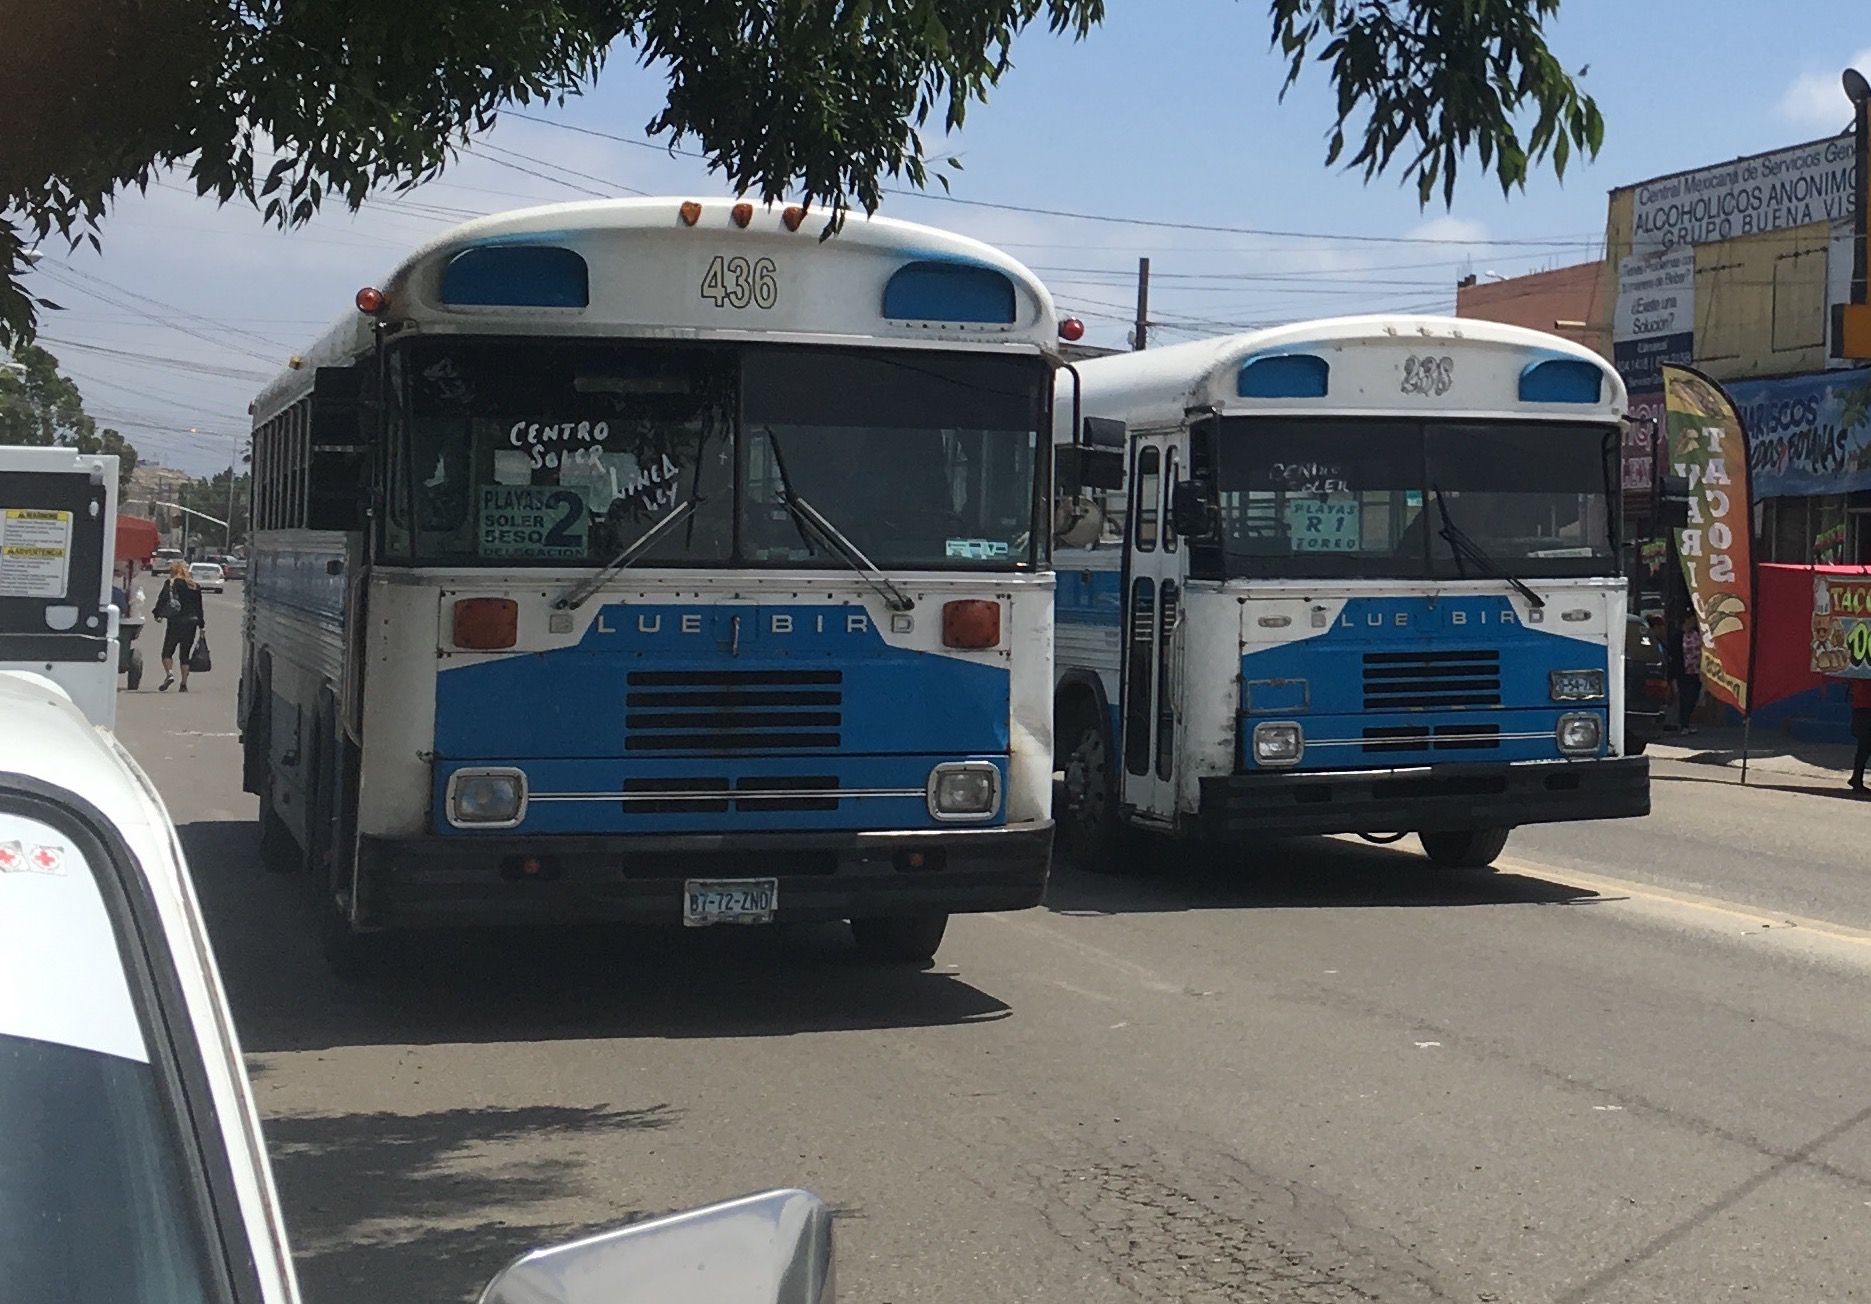 For decades, secondhand American school buses have been the workhorses of Tijuana's private bus fleets. Here, two from the same company, Azul y Blanco, run side-by-side, a practice that's frowned upon but common. Image by Patrick Reilly. Mexico, 2017.